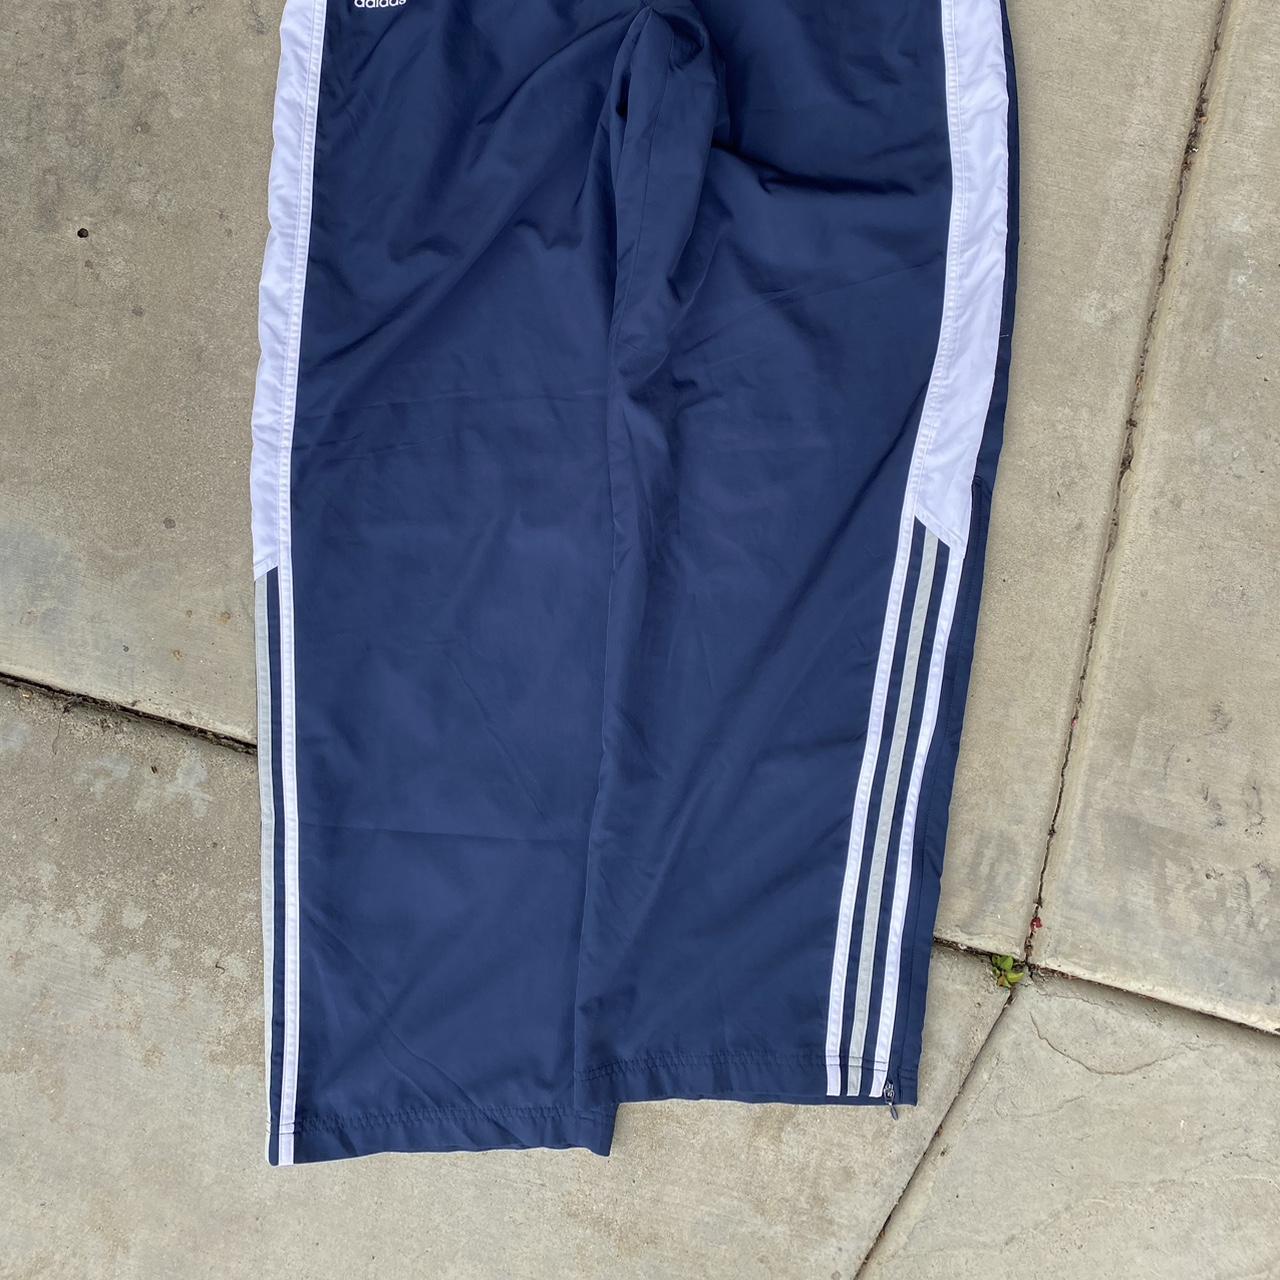 Men's Navy and Blue Joggers-tracksuits | Depop